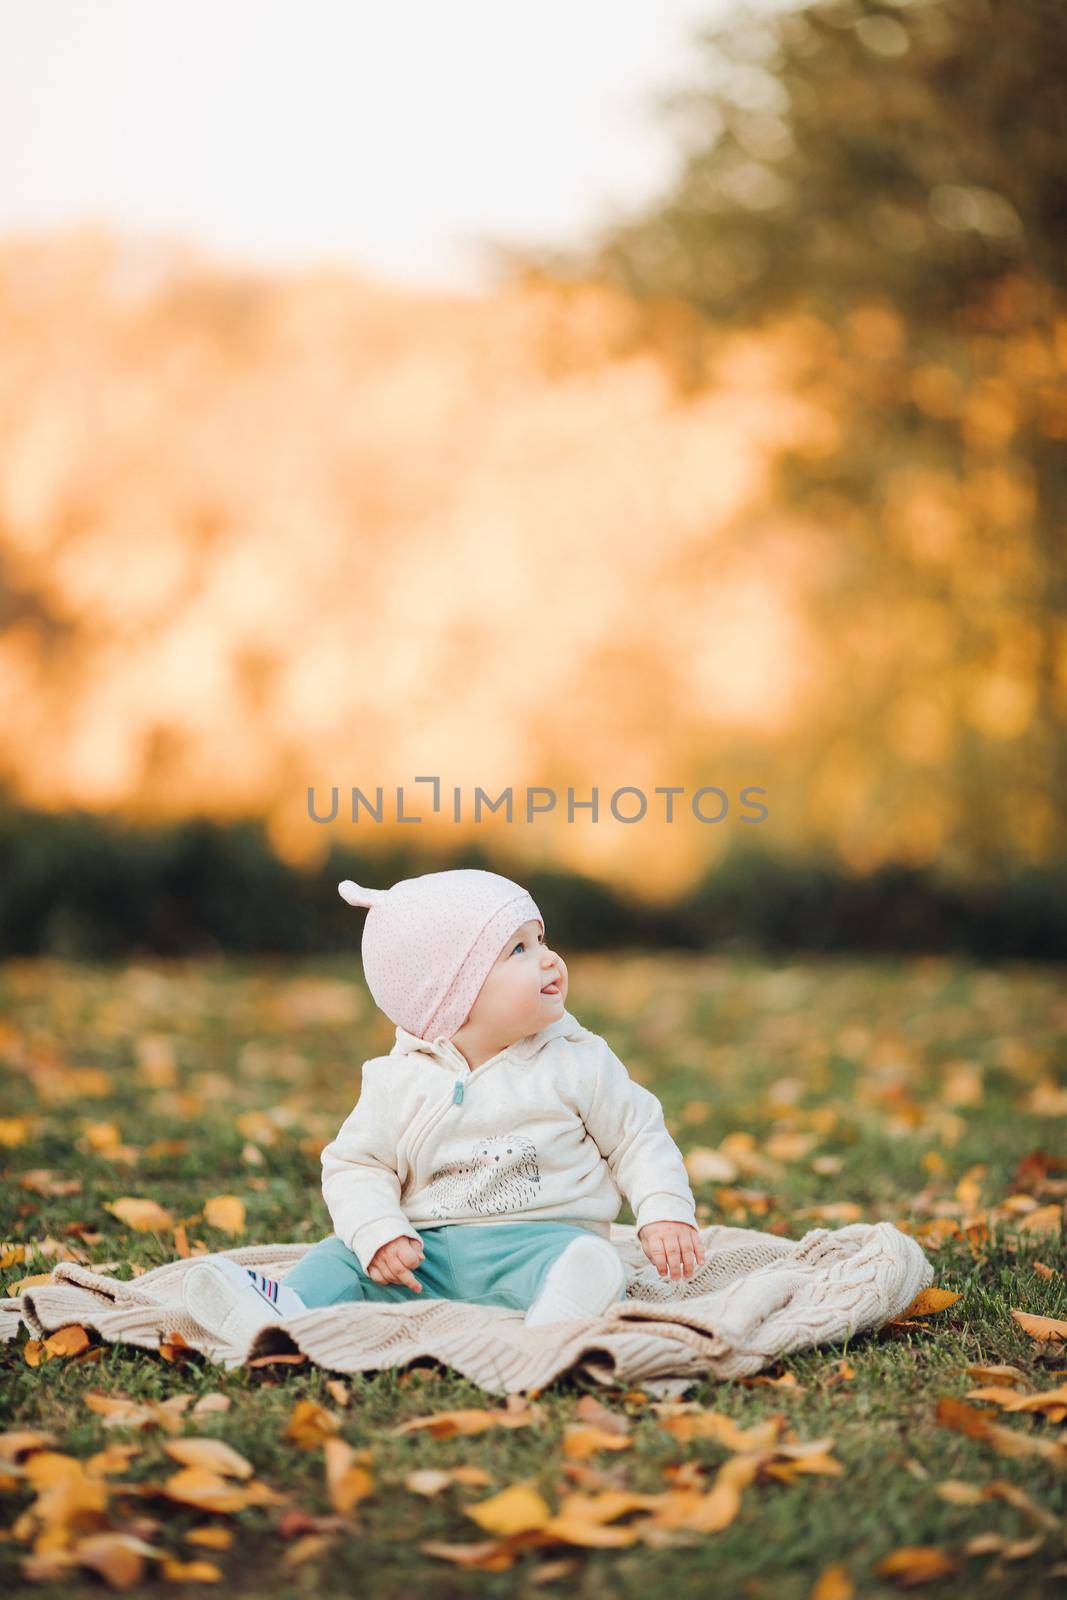 A little girl child in the autumn park smiles, spends time. Beautiful autumn background